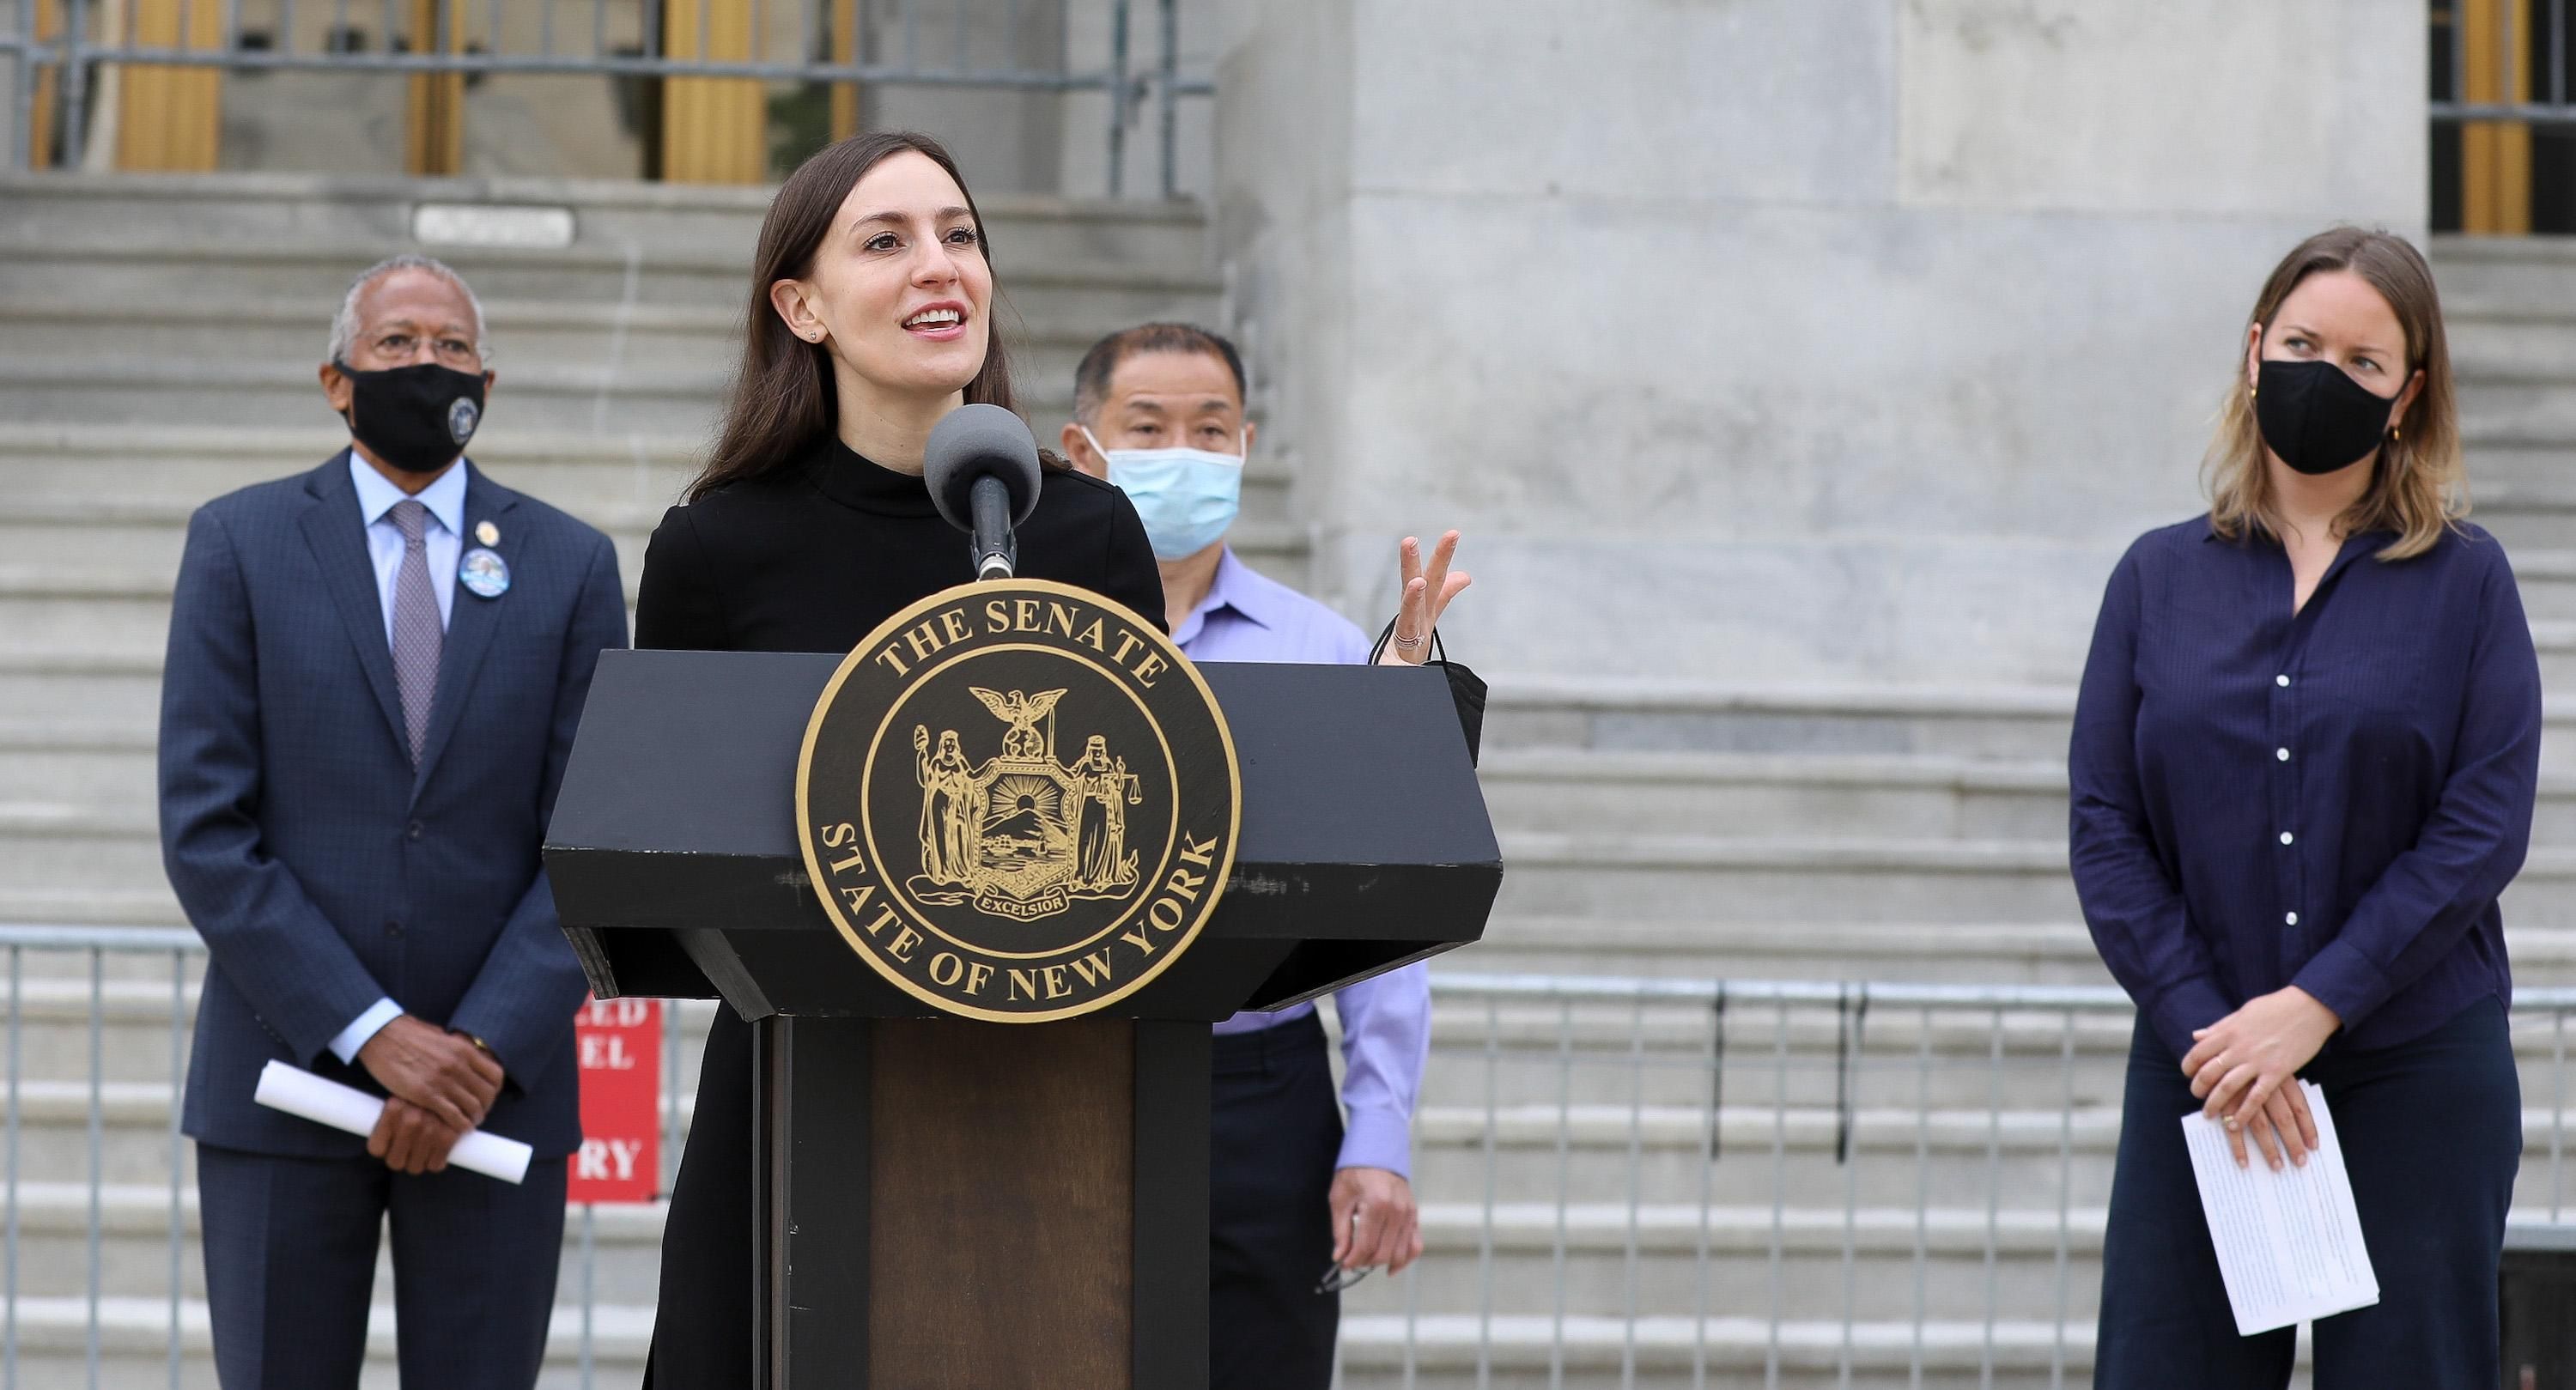 New York state Sen. Alessandra Biaggi holds a press conference in Albany on June 2, 2021. (Photo: NYS Senate Photo/CC BY 2.0)